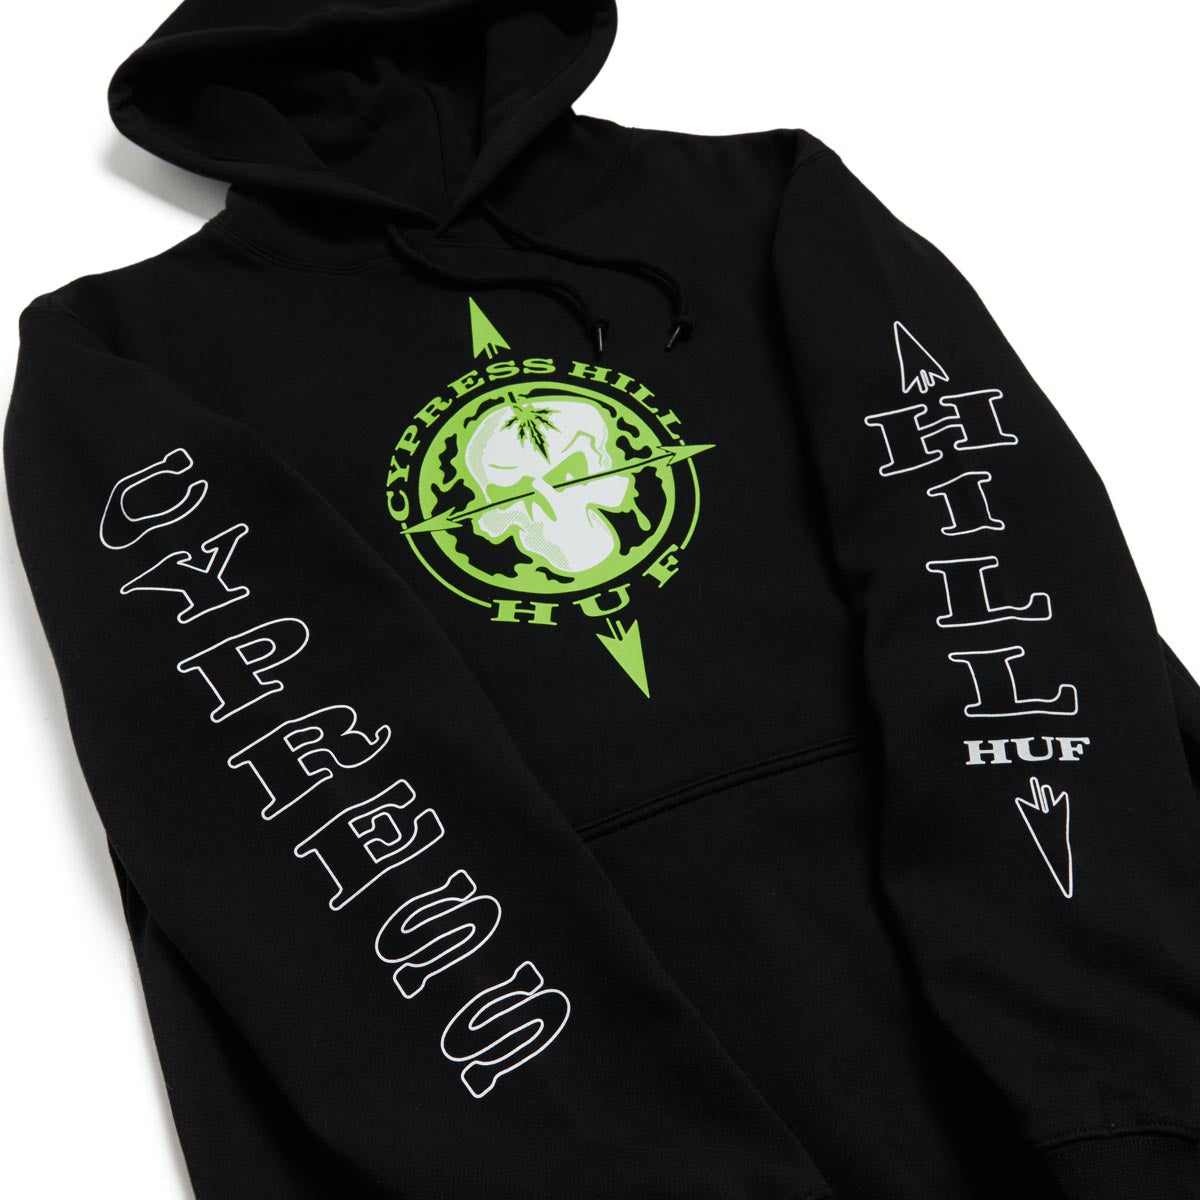 Huf x Cypress Hill Blunted Compass Hoodie - Black image 2